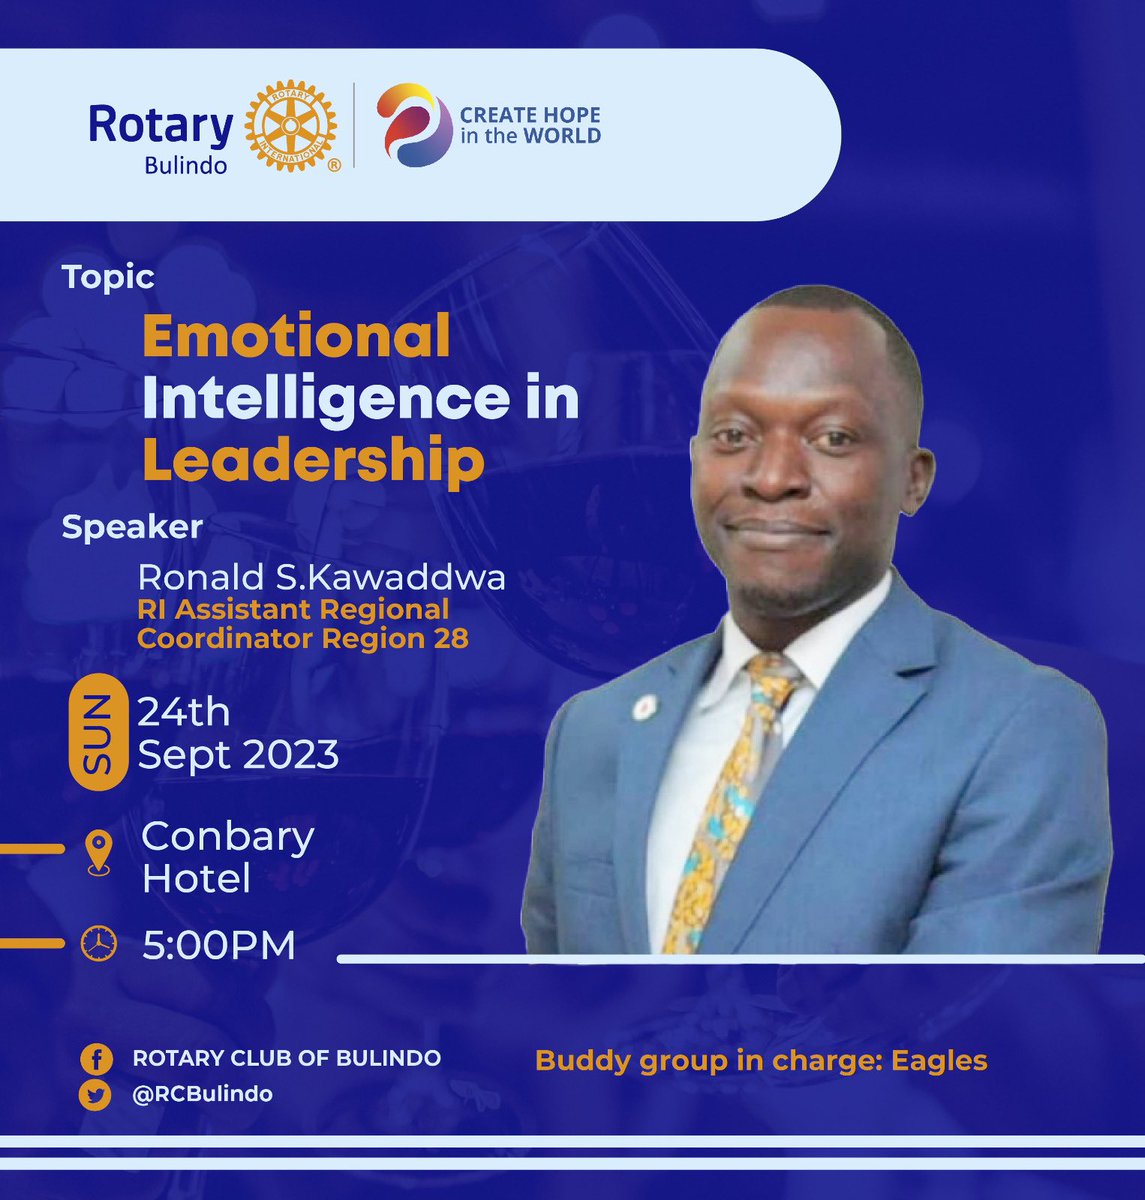 @RCBulindo will be hosting @RKawaddwa this Sunday to enlighten us on #EmotionalIntelligence in Leadership! Join us this Sunday at Conbary Resort, Bulindo - 5pm and gain insight and skills that will make you more effective leaders. #RotaryFellowship #LeadershipDevelopment 💼🤝🌍